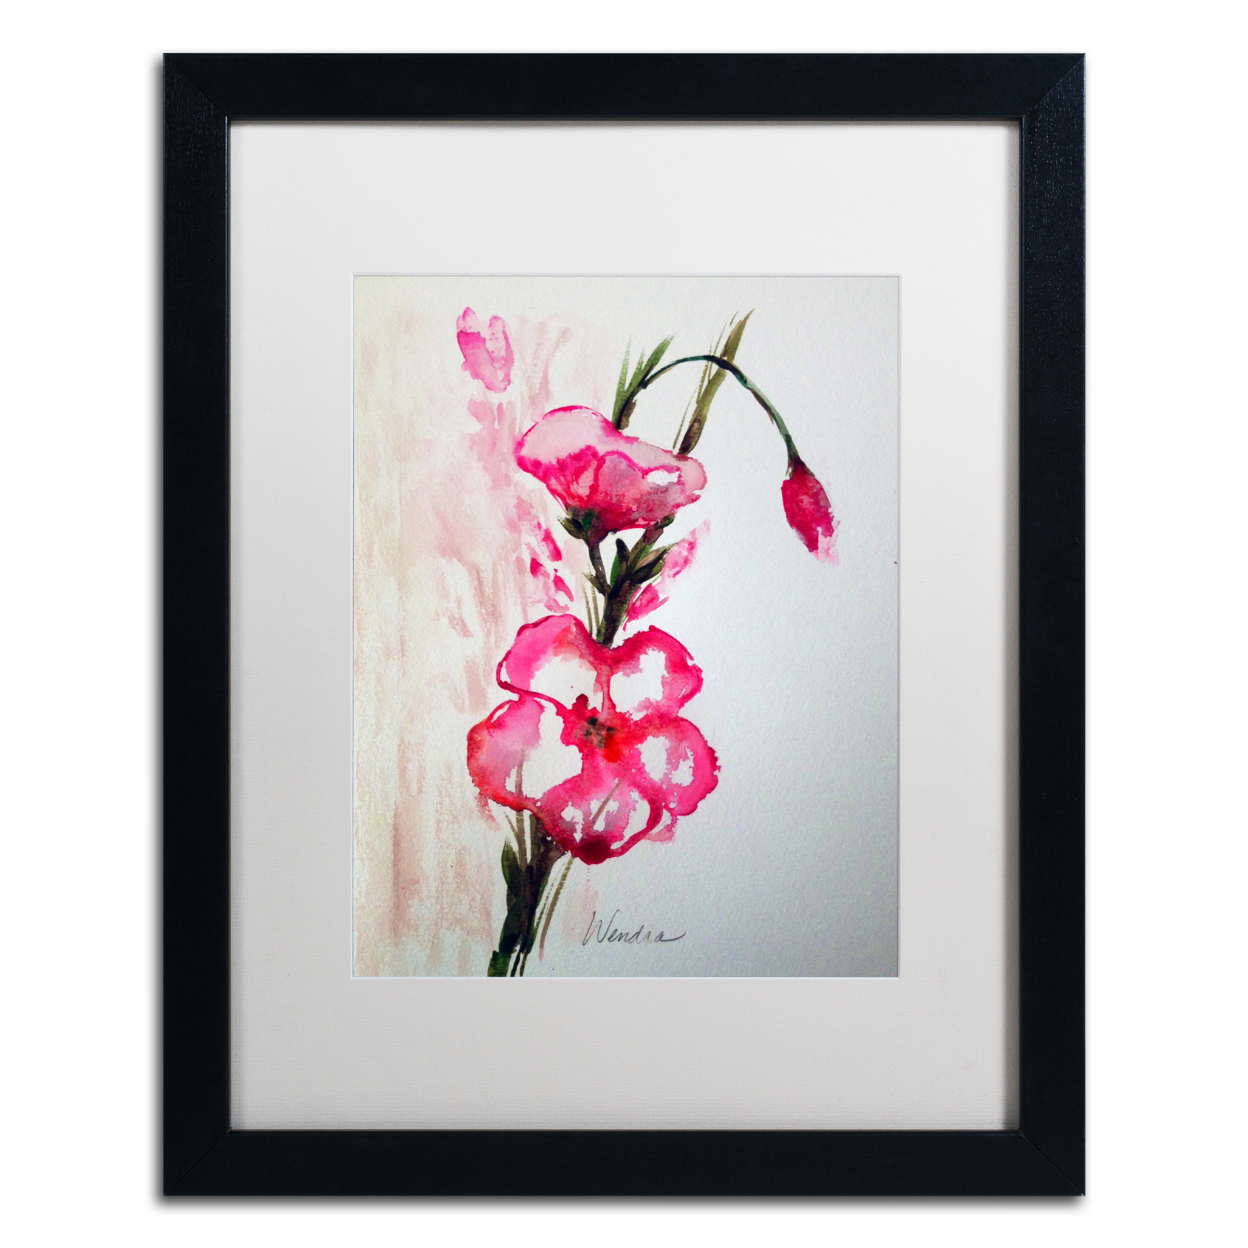 Wendra 'New Bloom' Black Wooden Framed Art 18 X 22 Inches